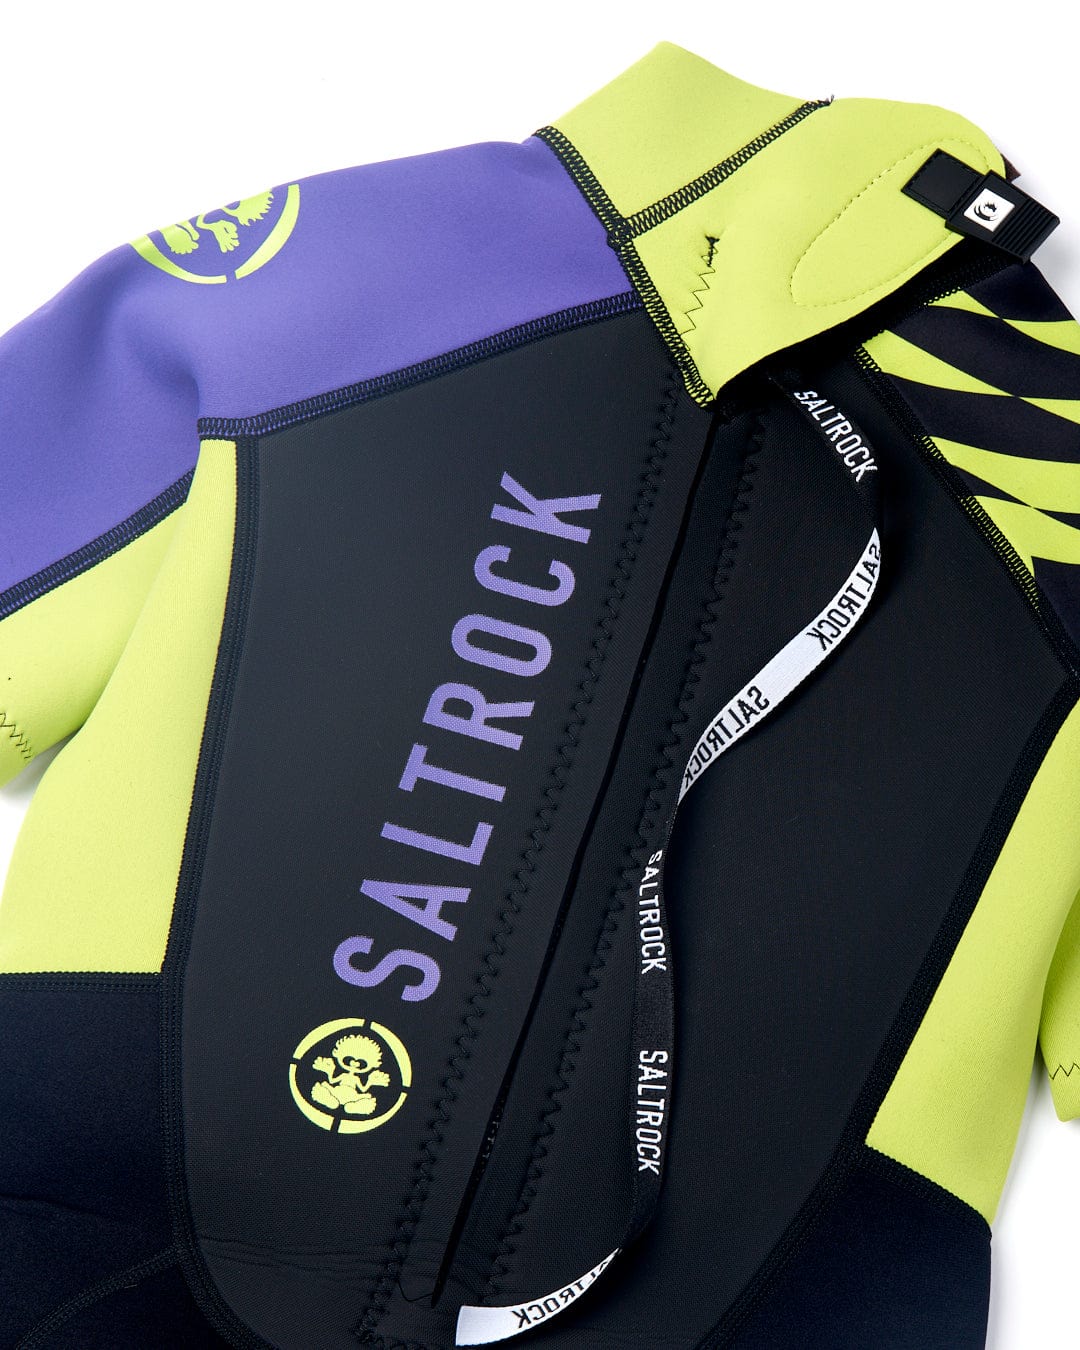 A close-up view of a Saltrock Warped Kids 3/2 Back Zip Wetsuit in black with neon green colors and company logos on the chest and arm.